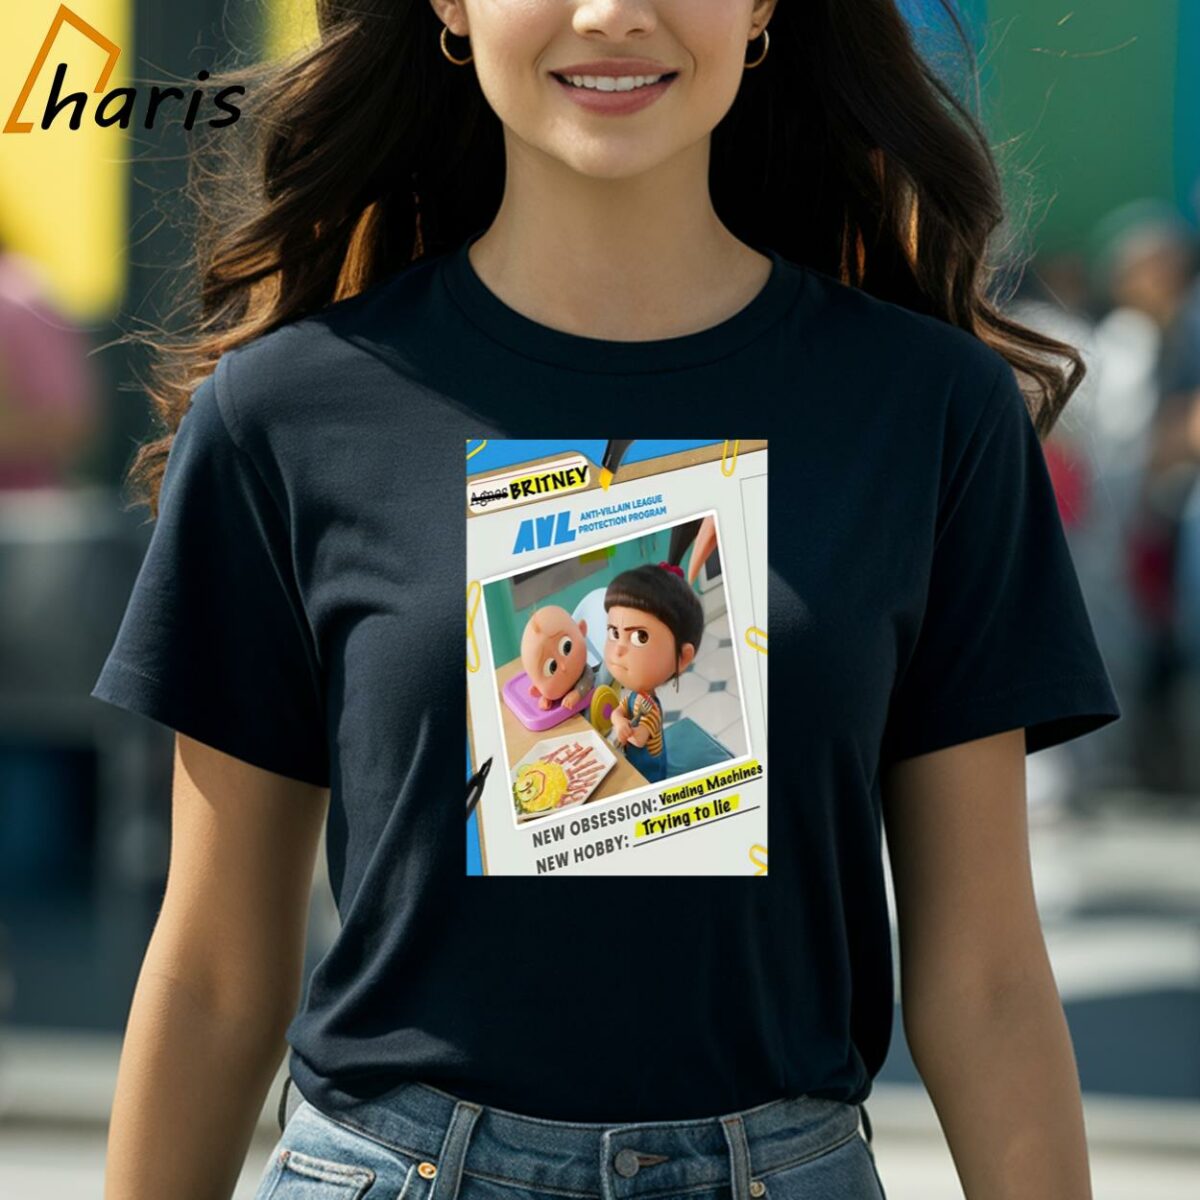 Despicable Me 4 Agnes As Britney Her Name Has Always Been Britney AVL New Dos Referral Shirt 2 Shirt